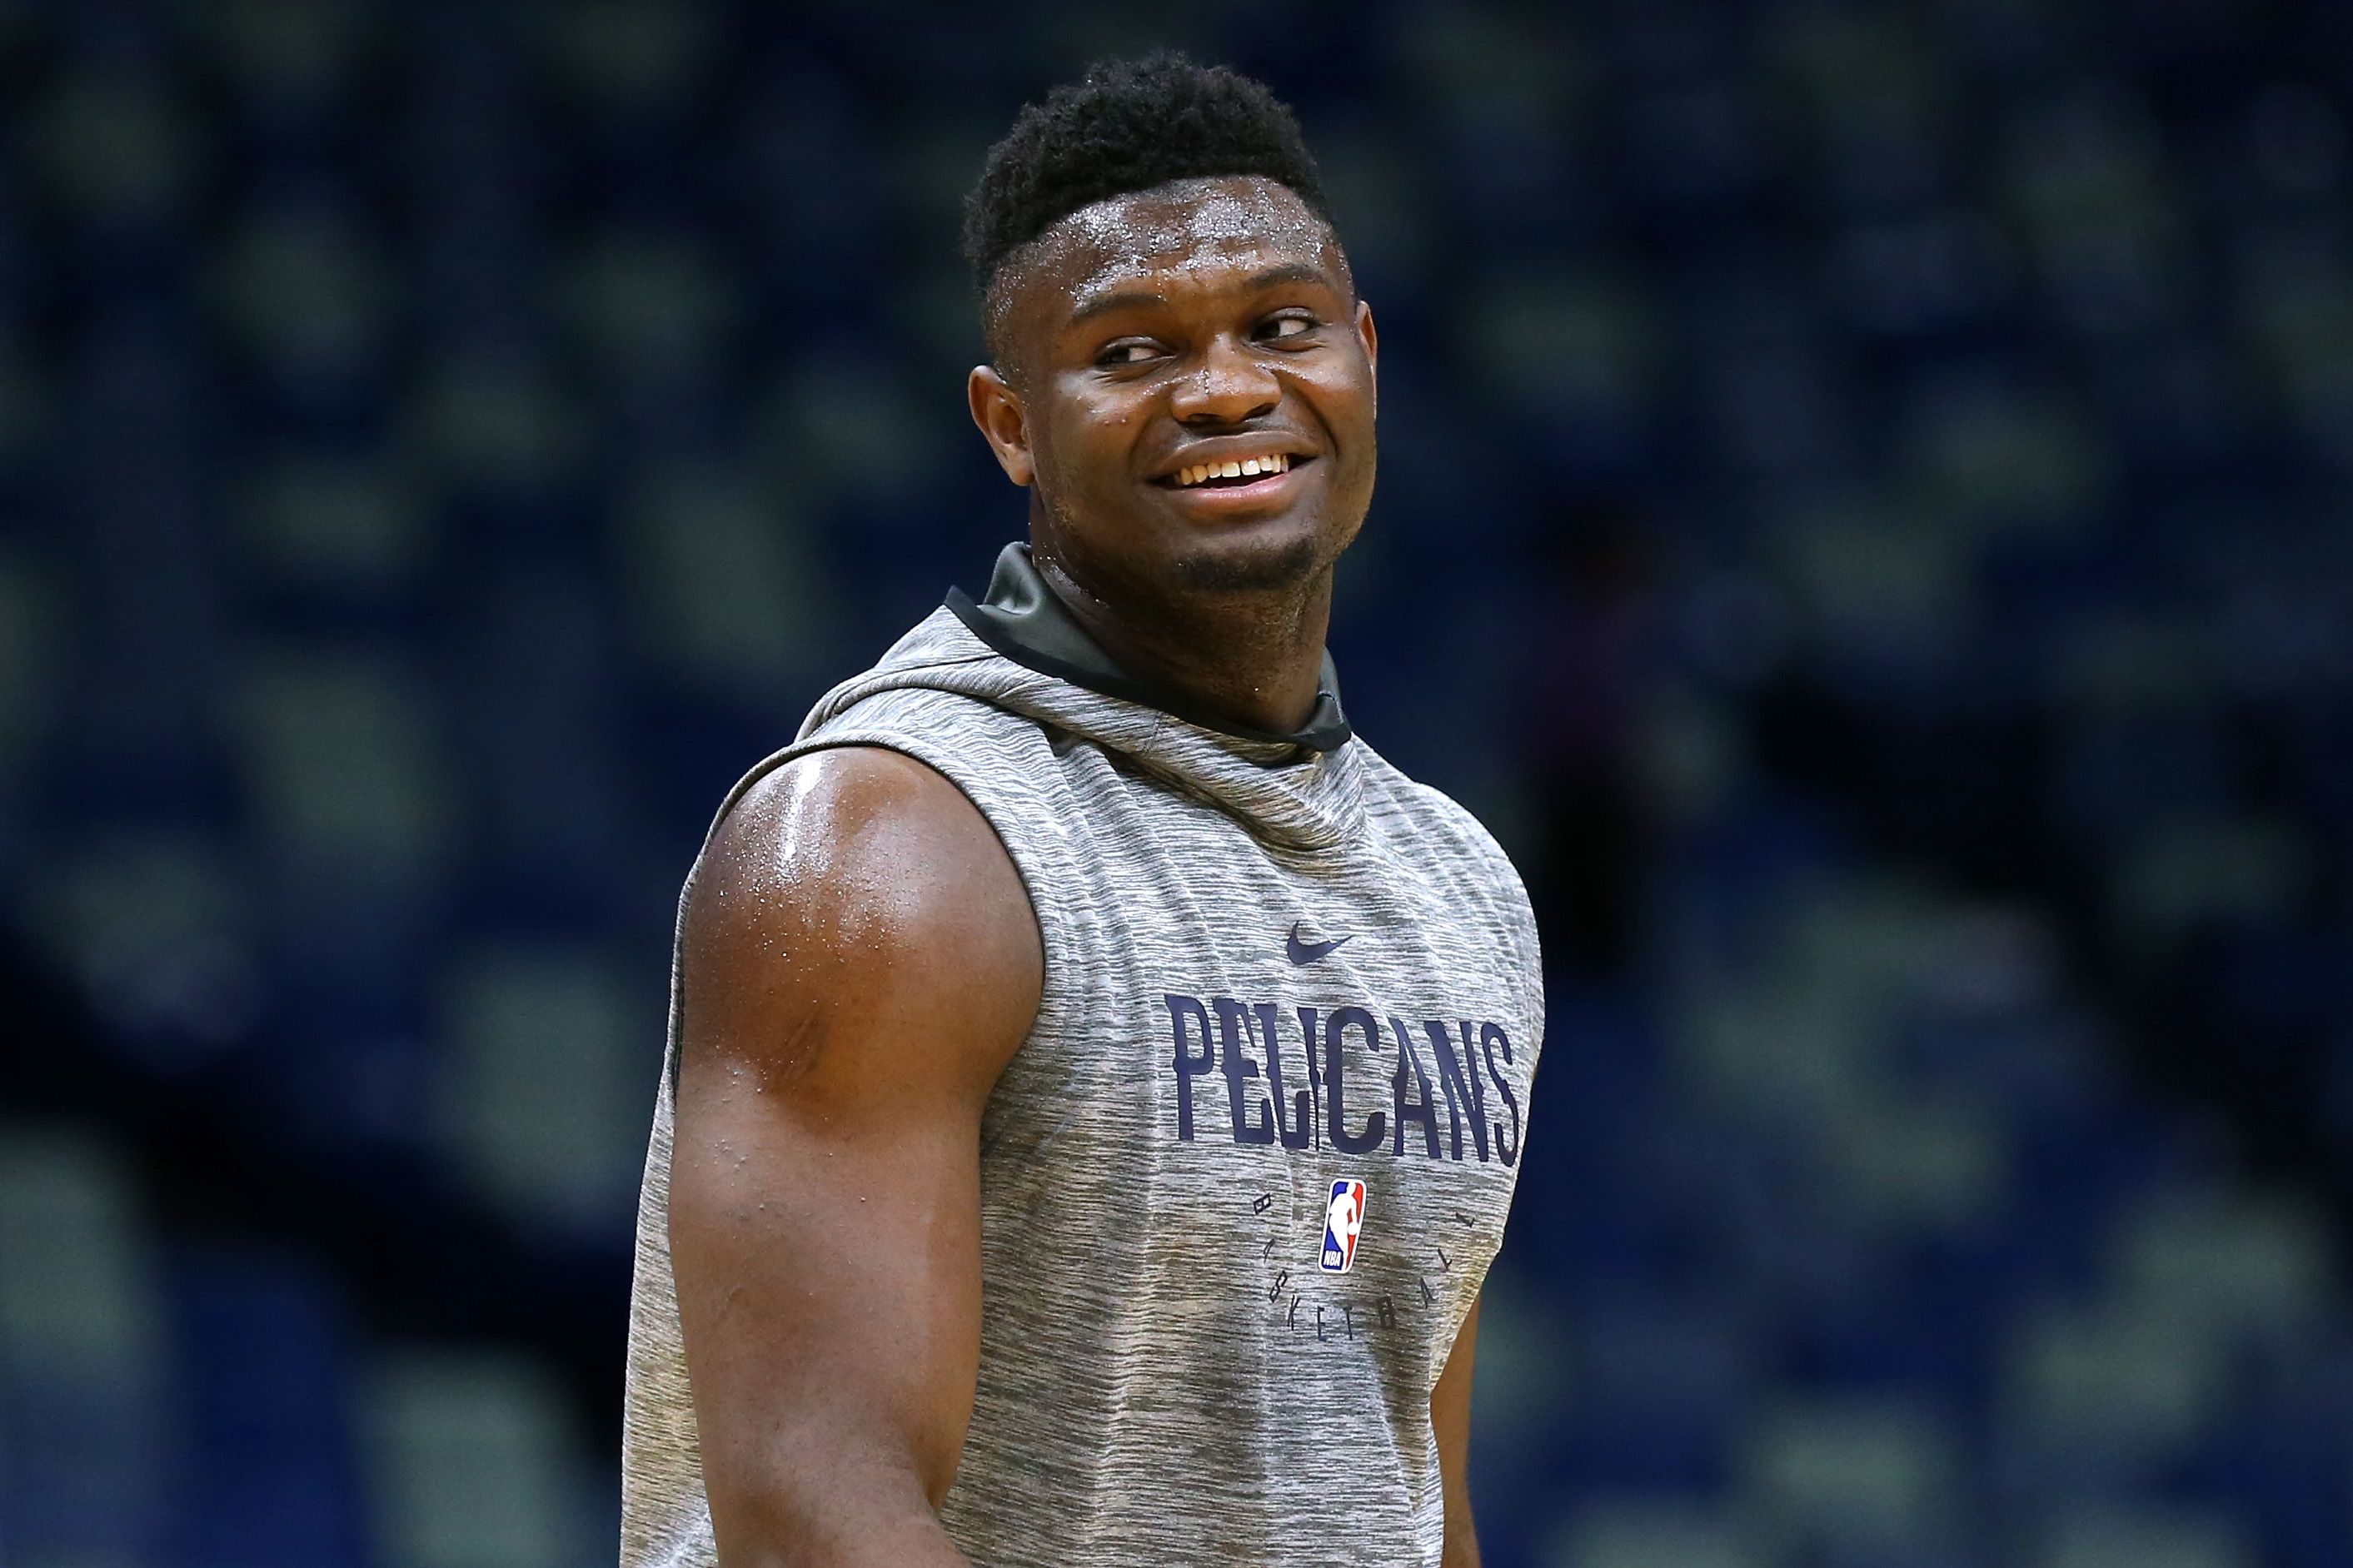 Zion Williamson hit with $100 million lawsuit just before NBA